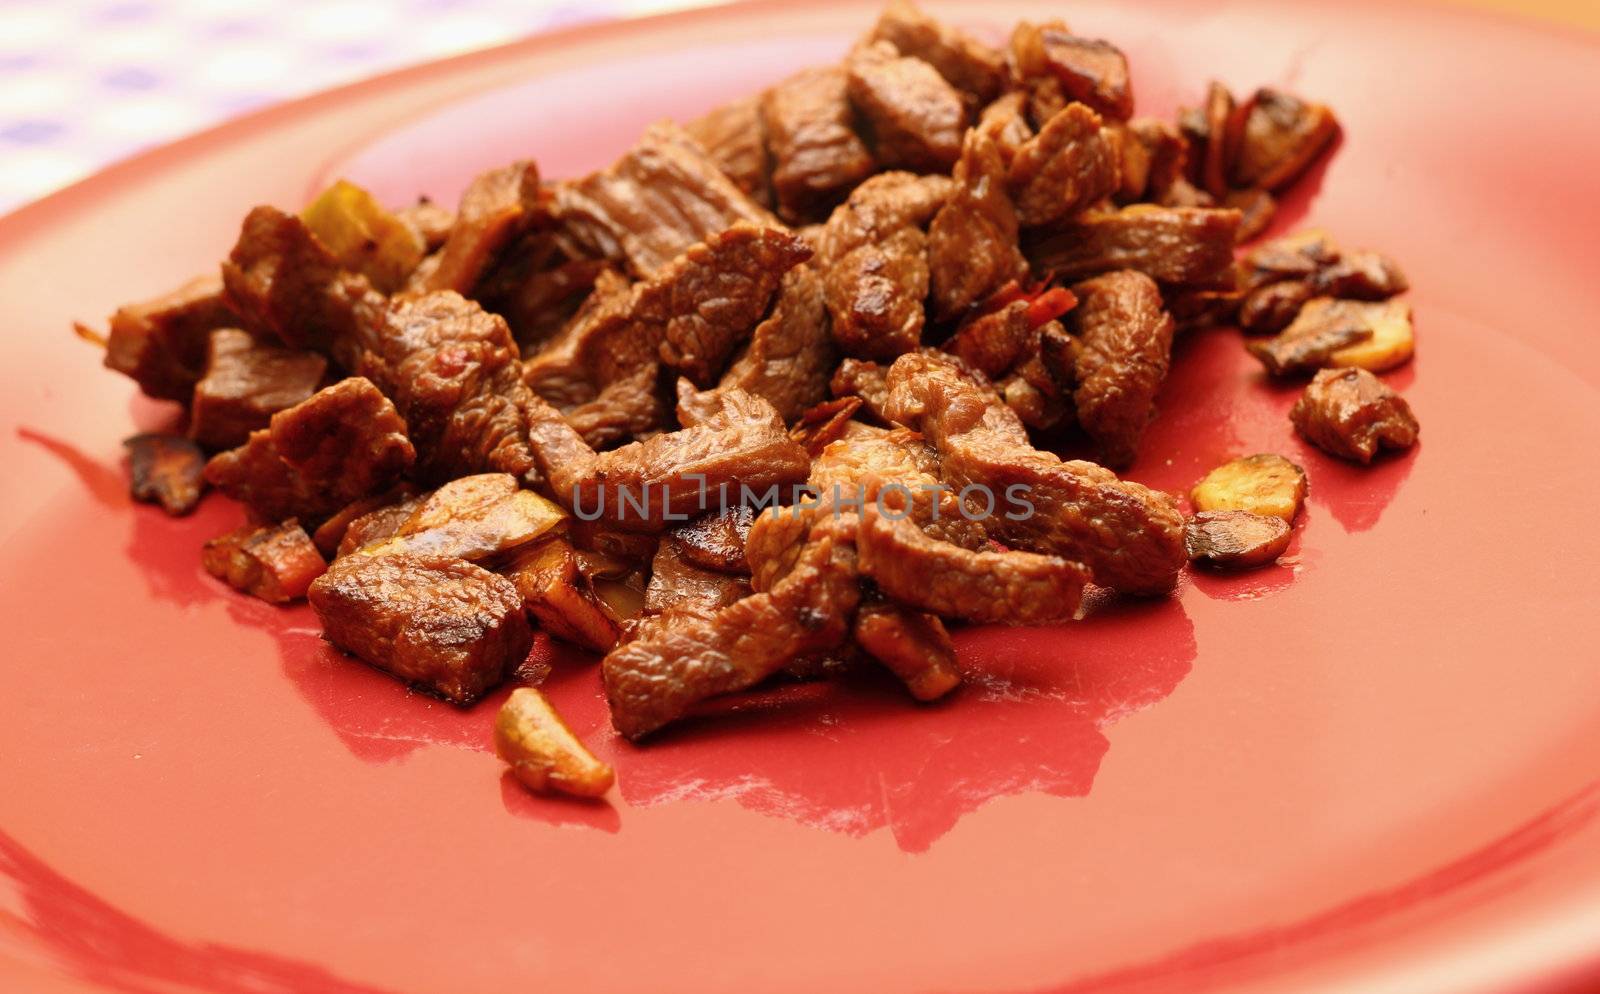 fried beef slices on a red dish